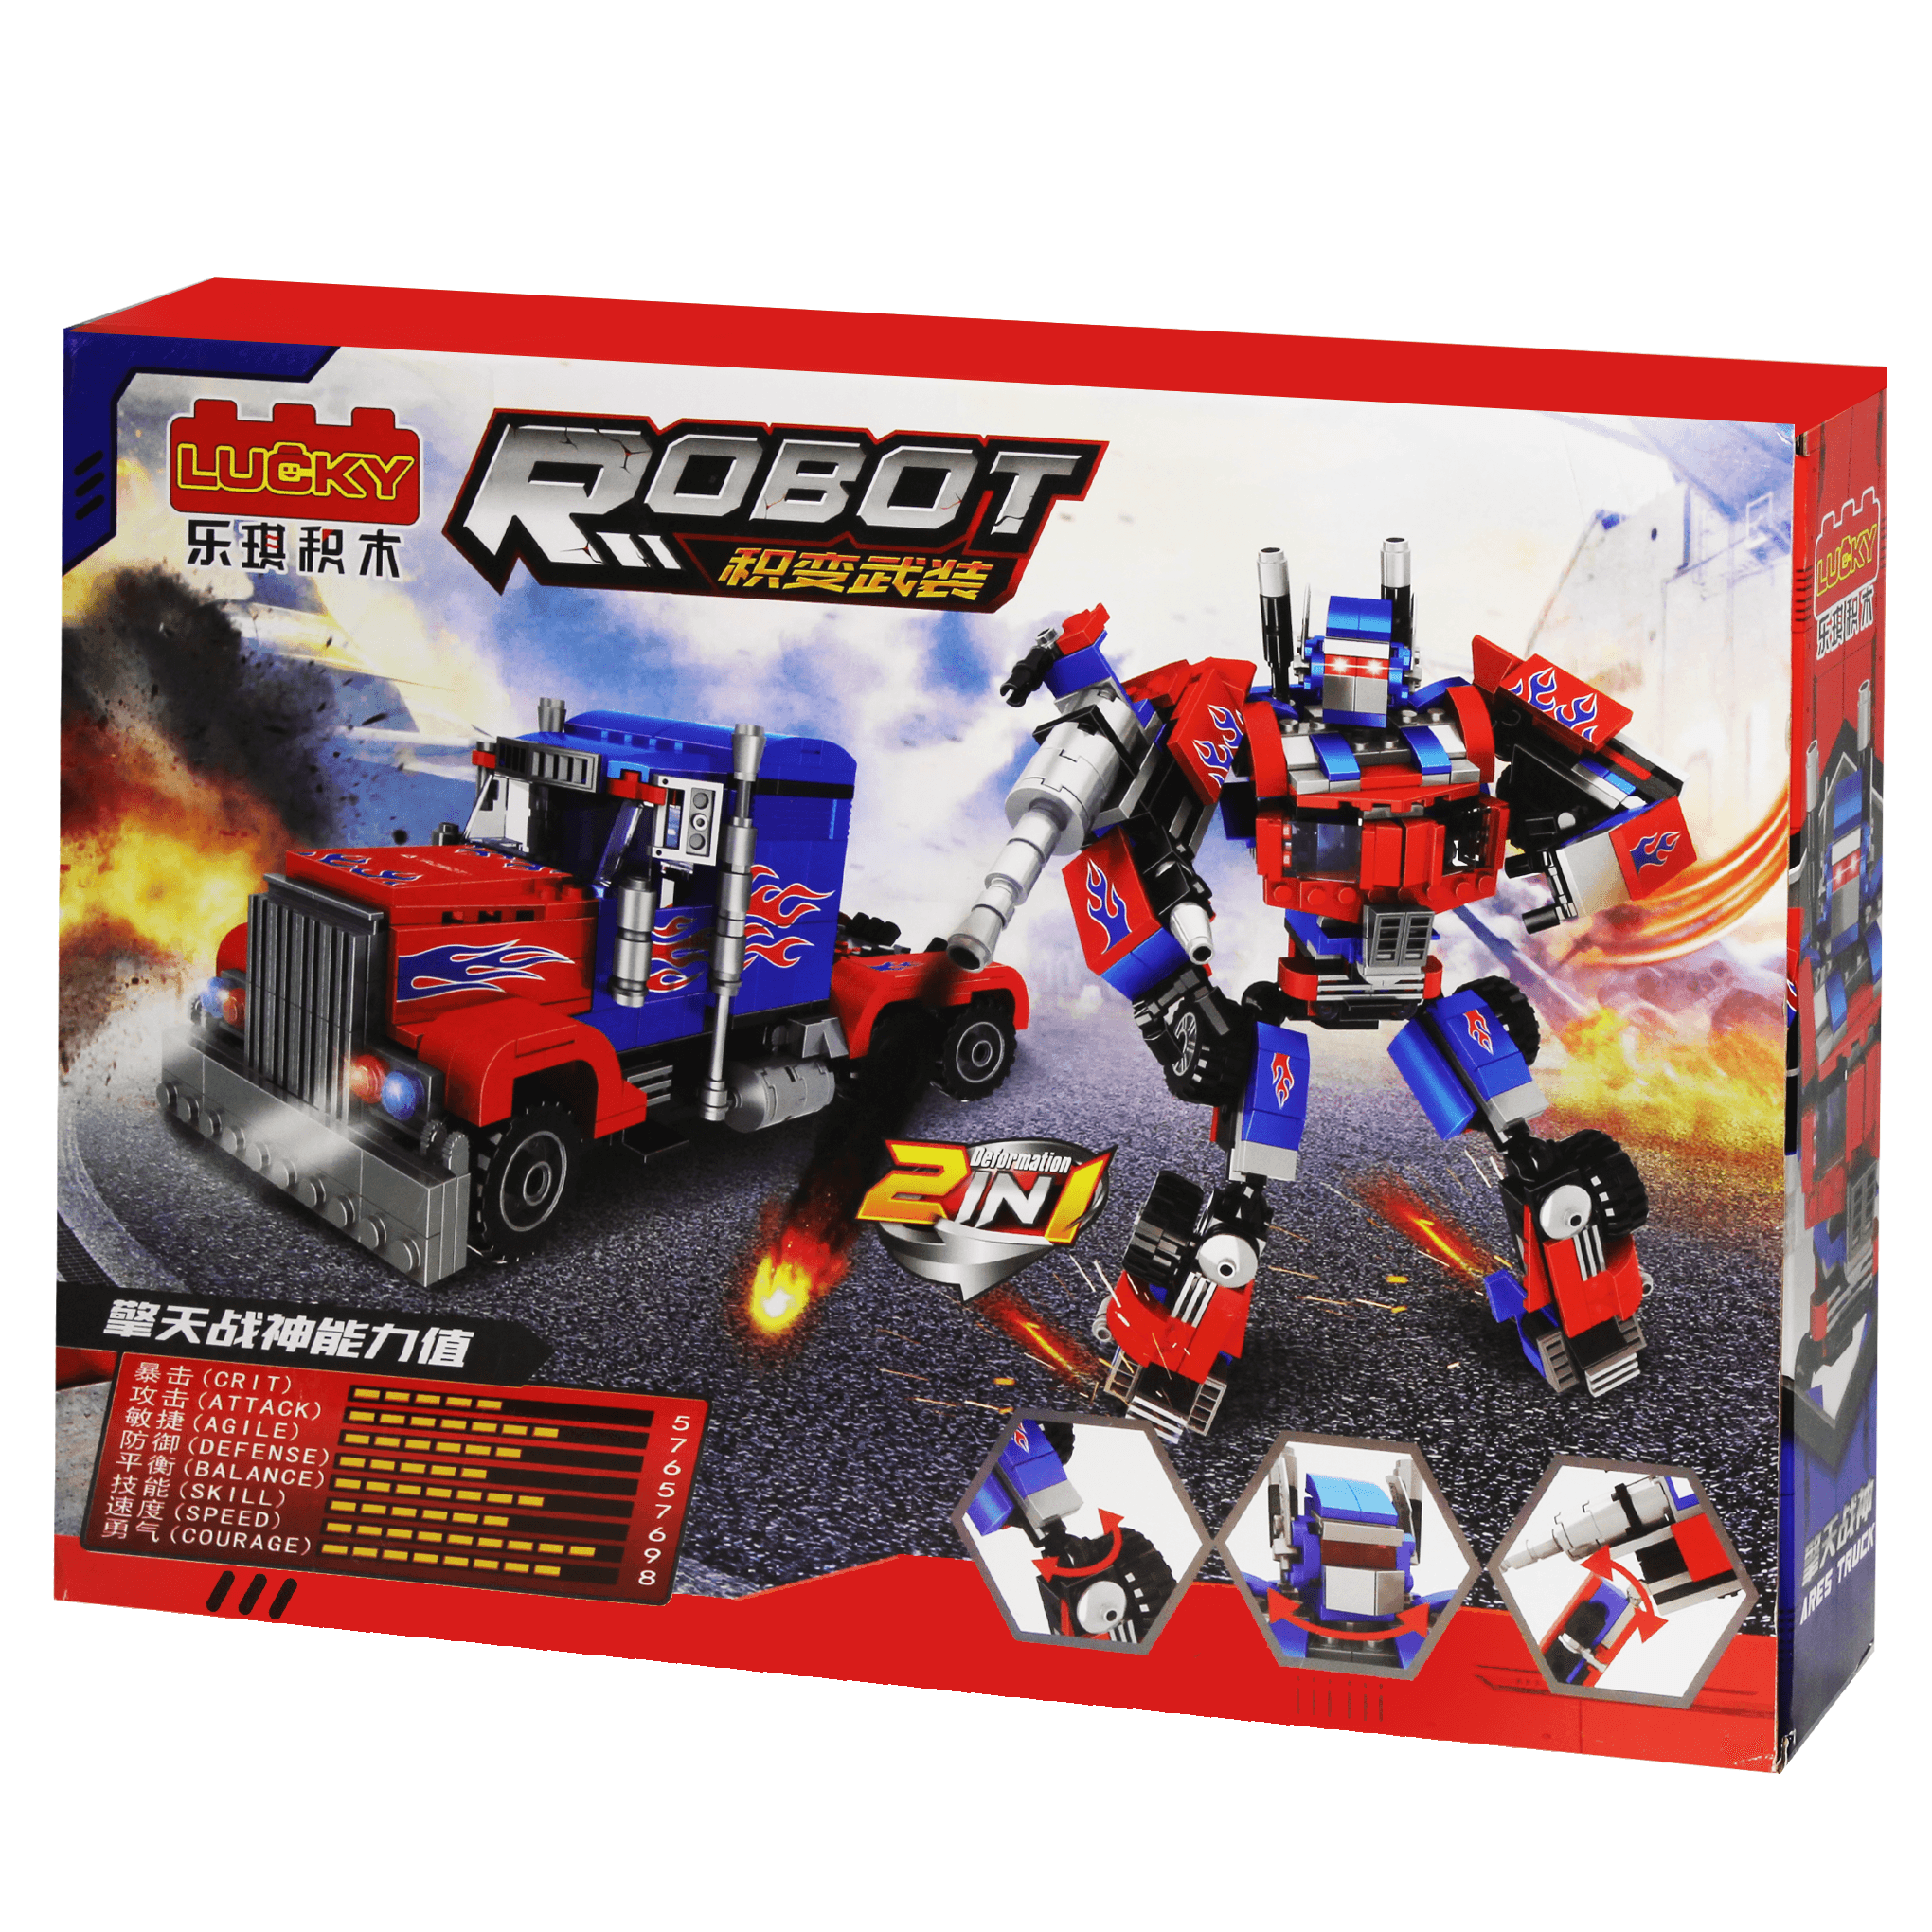 Lucky 55032 2 In 1 Transoformers Optimus Prime Robot and Car Building Kit (560 Pcs) - BumbleToys - 14 Years & Up, 18+, Boys, Building Sets & Blocks, Creator, LEGO, Rocket Raccoon, Toy Land